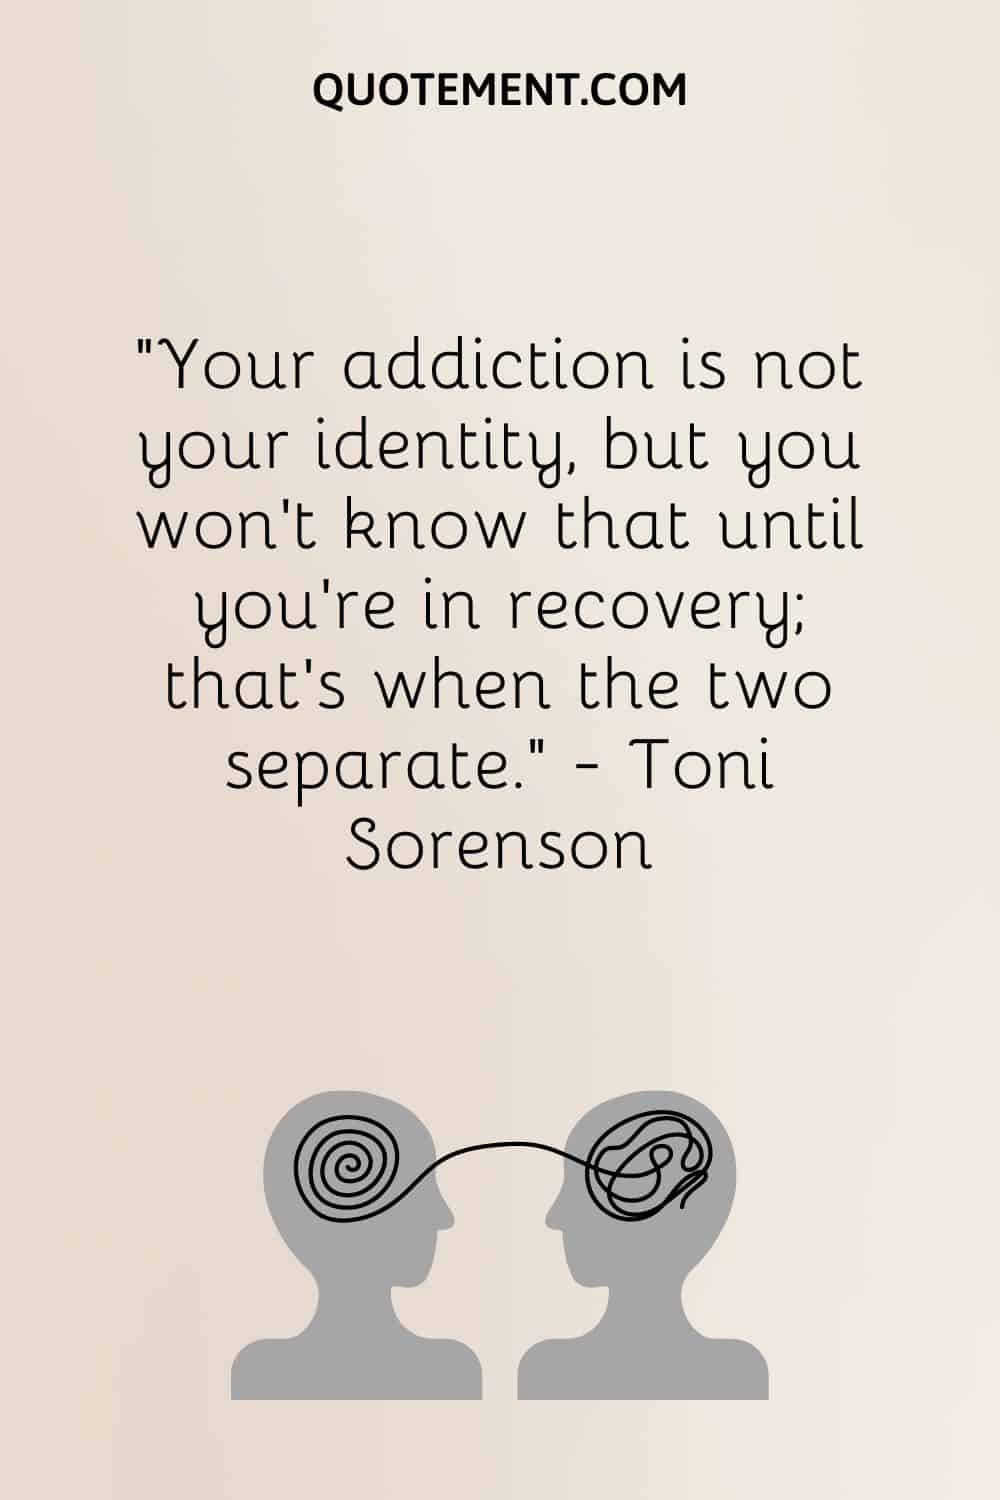 Your addiction is not your identity, but you won’t know that until you’re in recovery